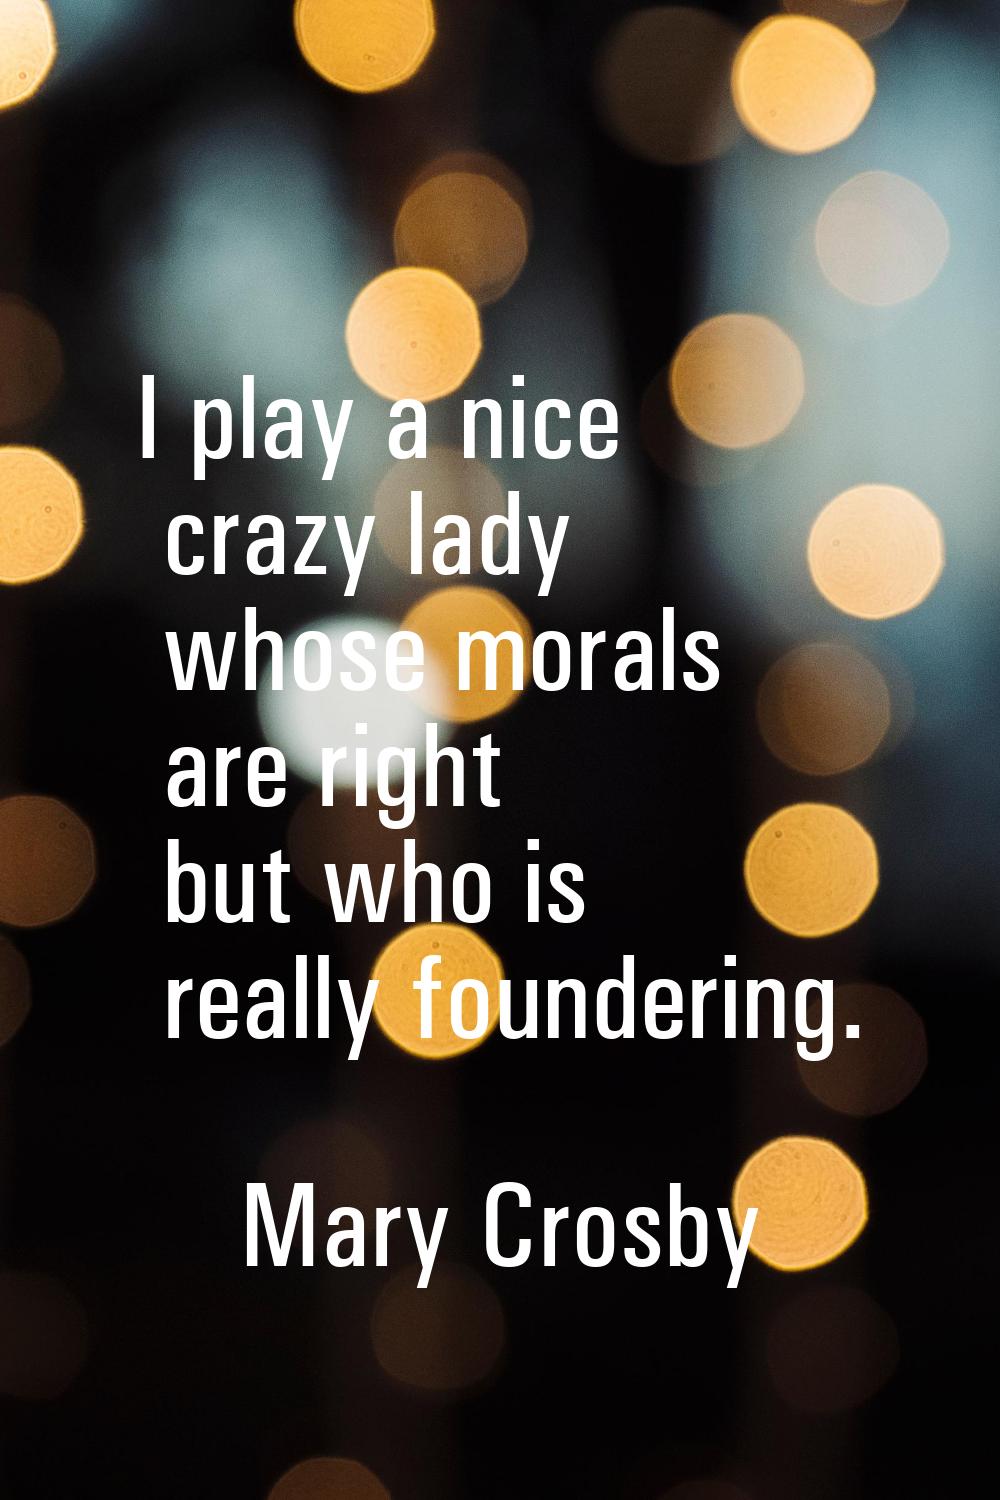 I play a nice crazy lady whose morals are right but who is really foundering.